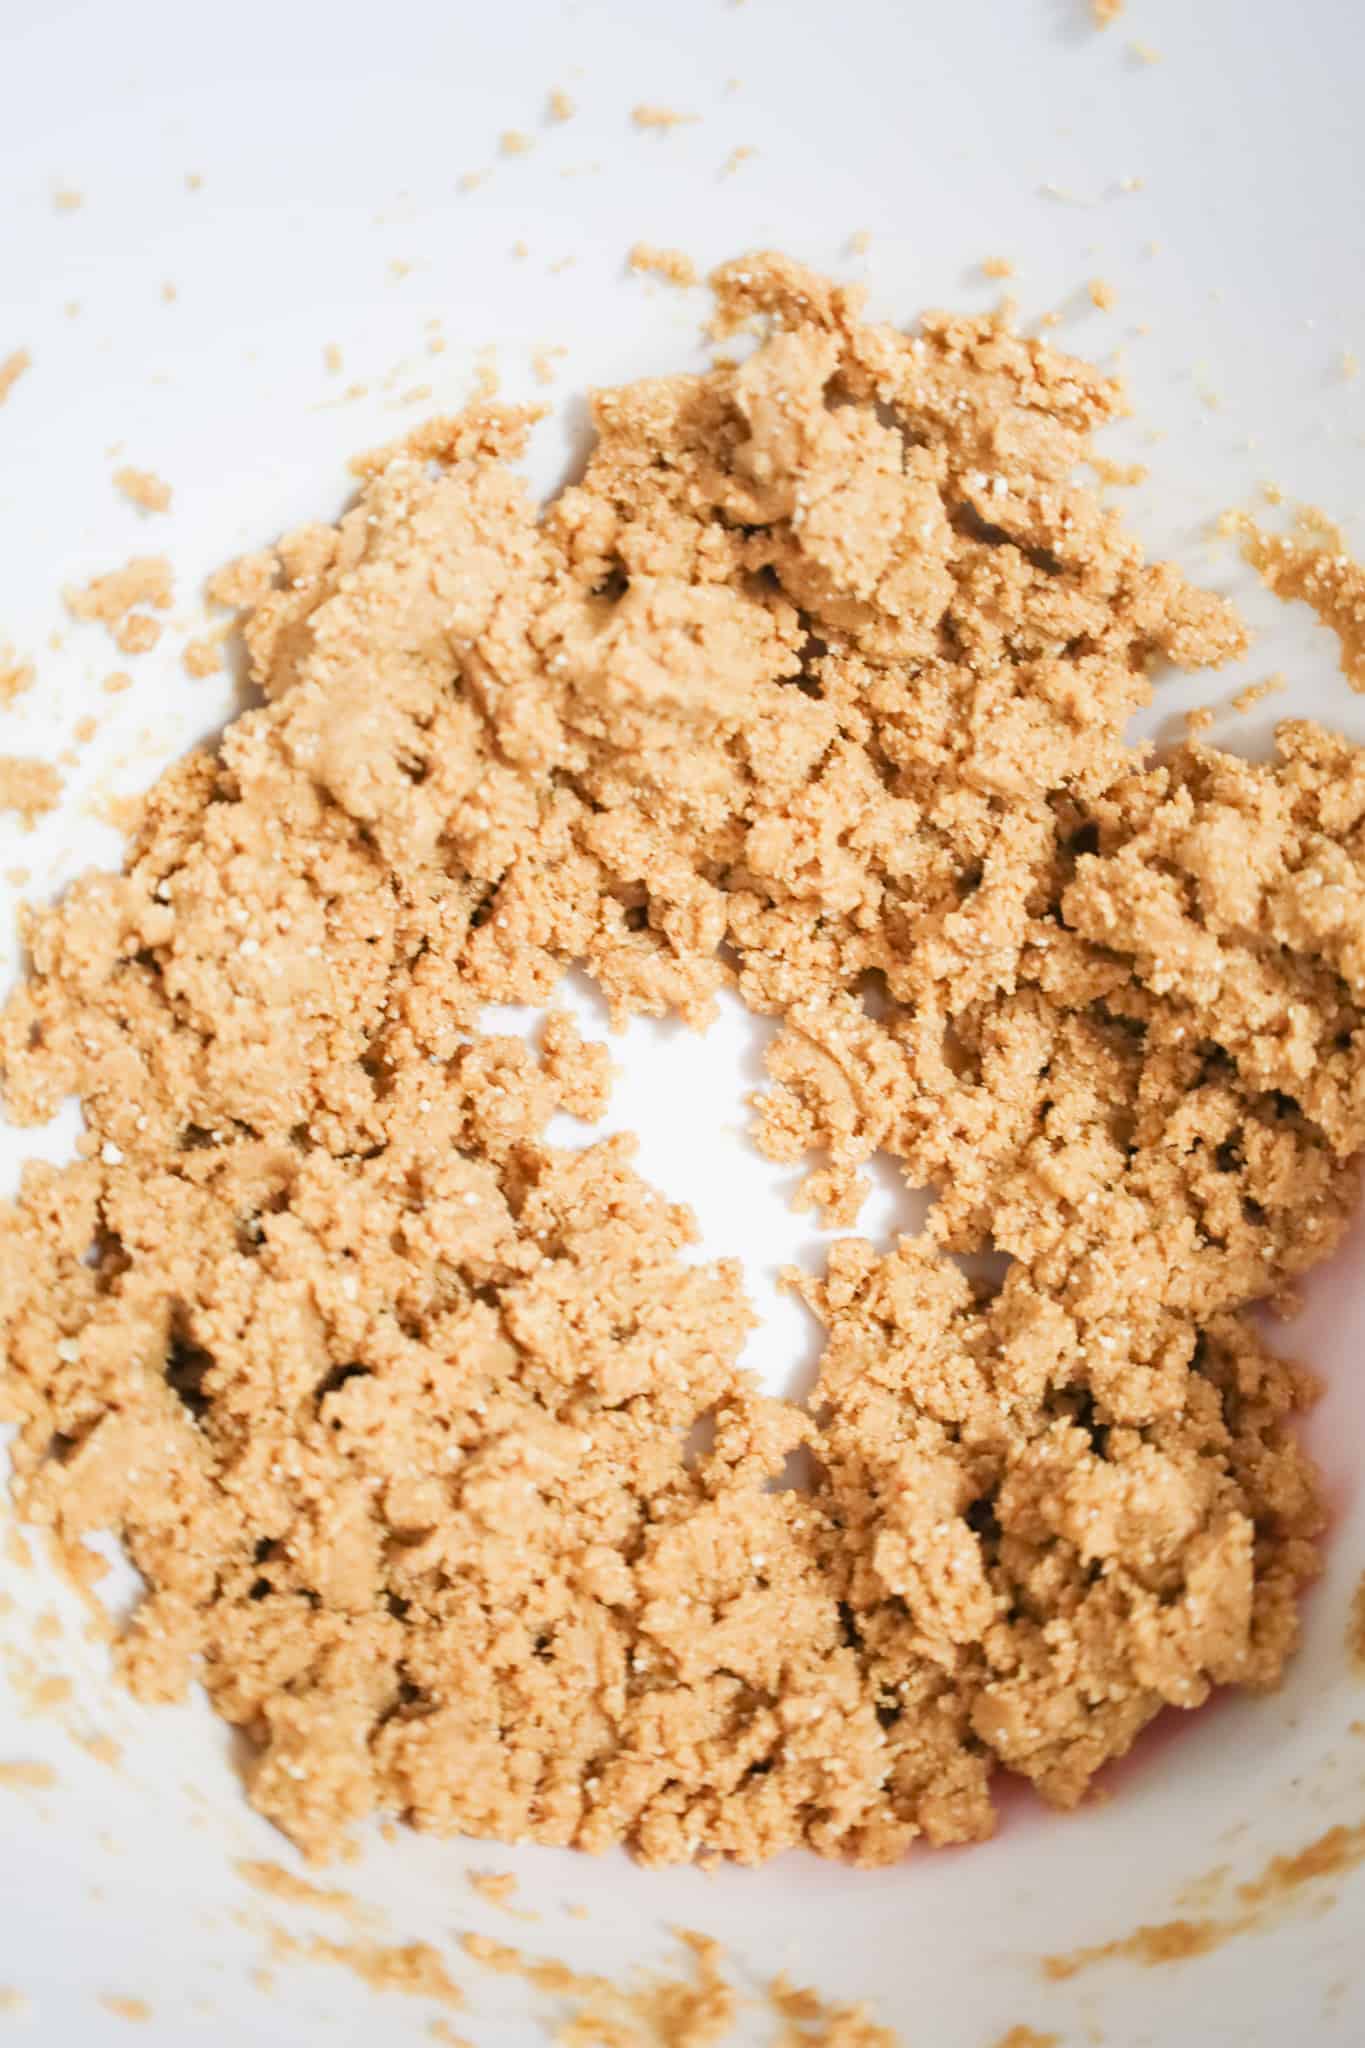 peanut butter and powdered milk mixture in a mixing bowl